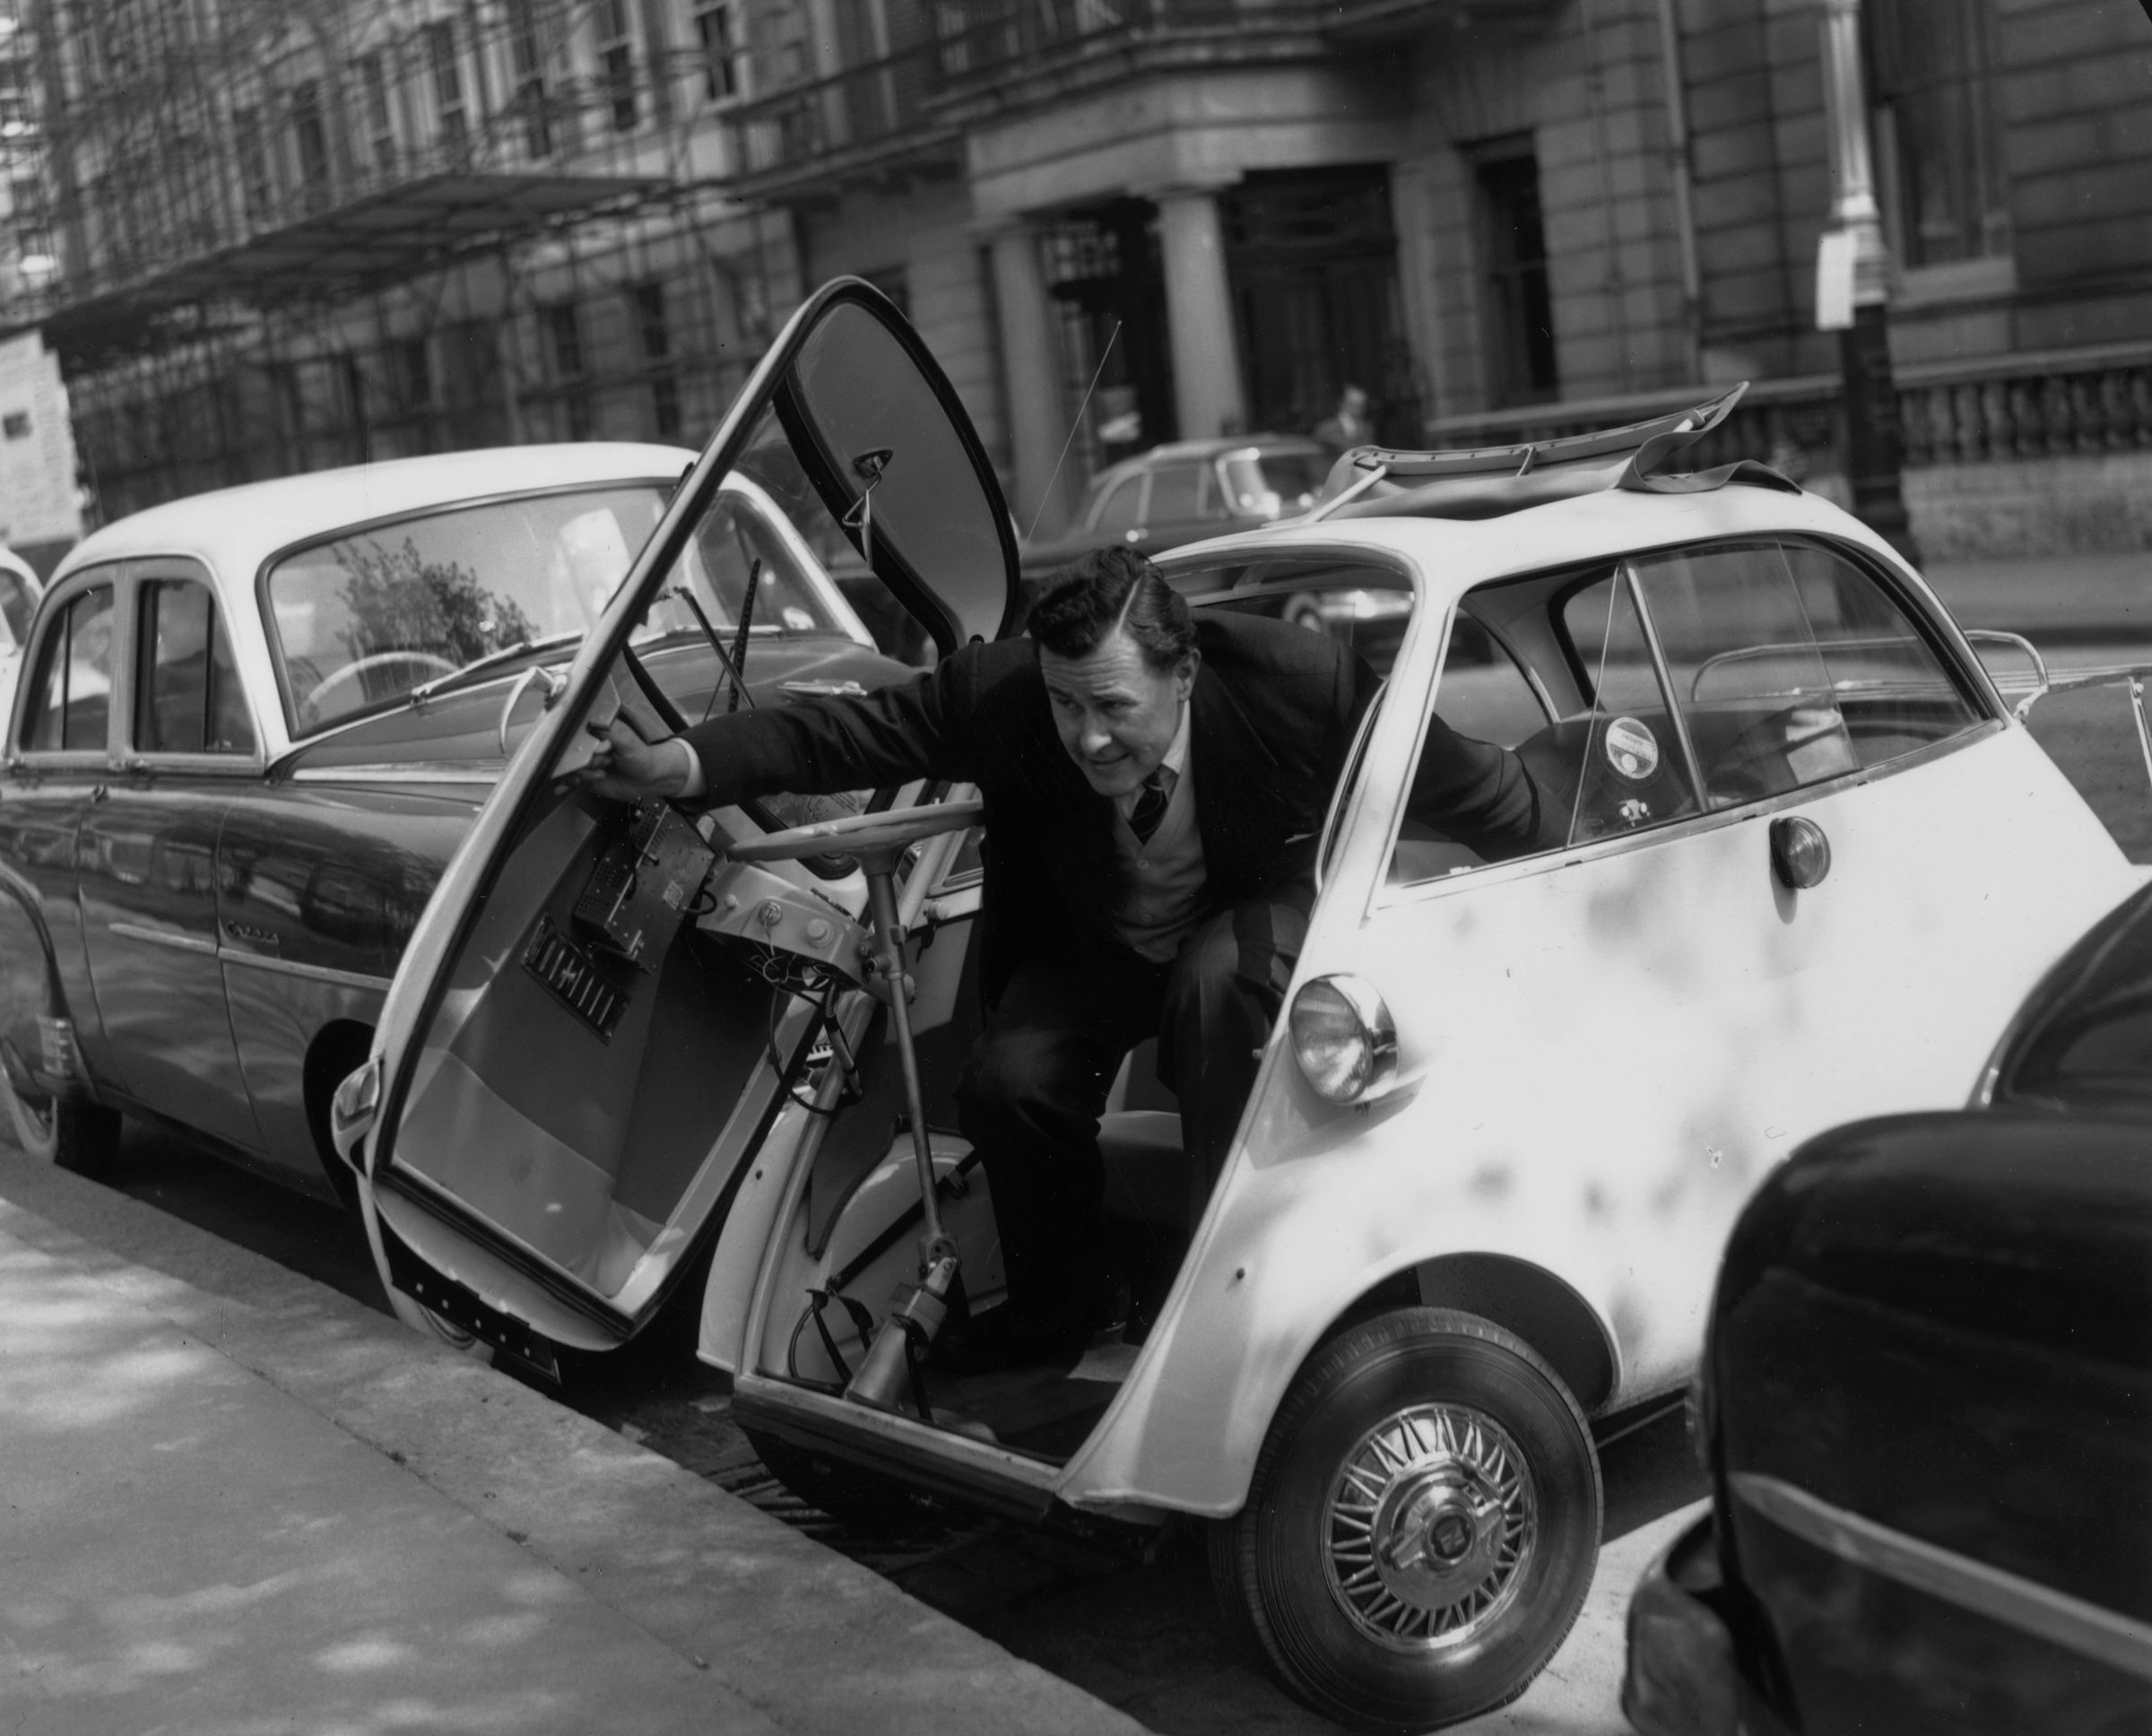 Exit via sunroof, and other tips for a microcar novice